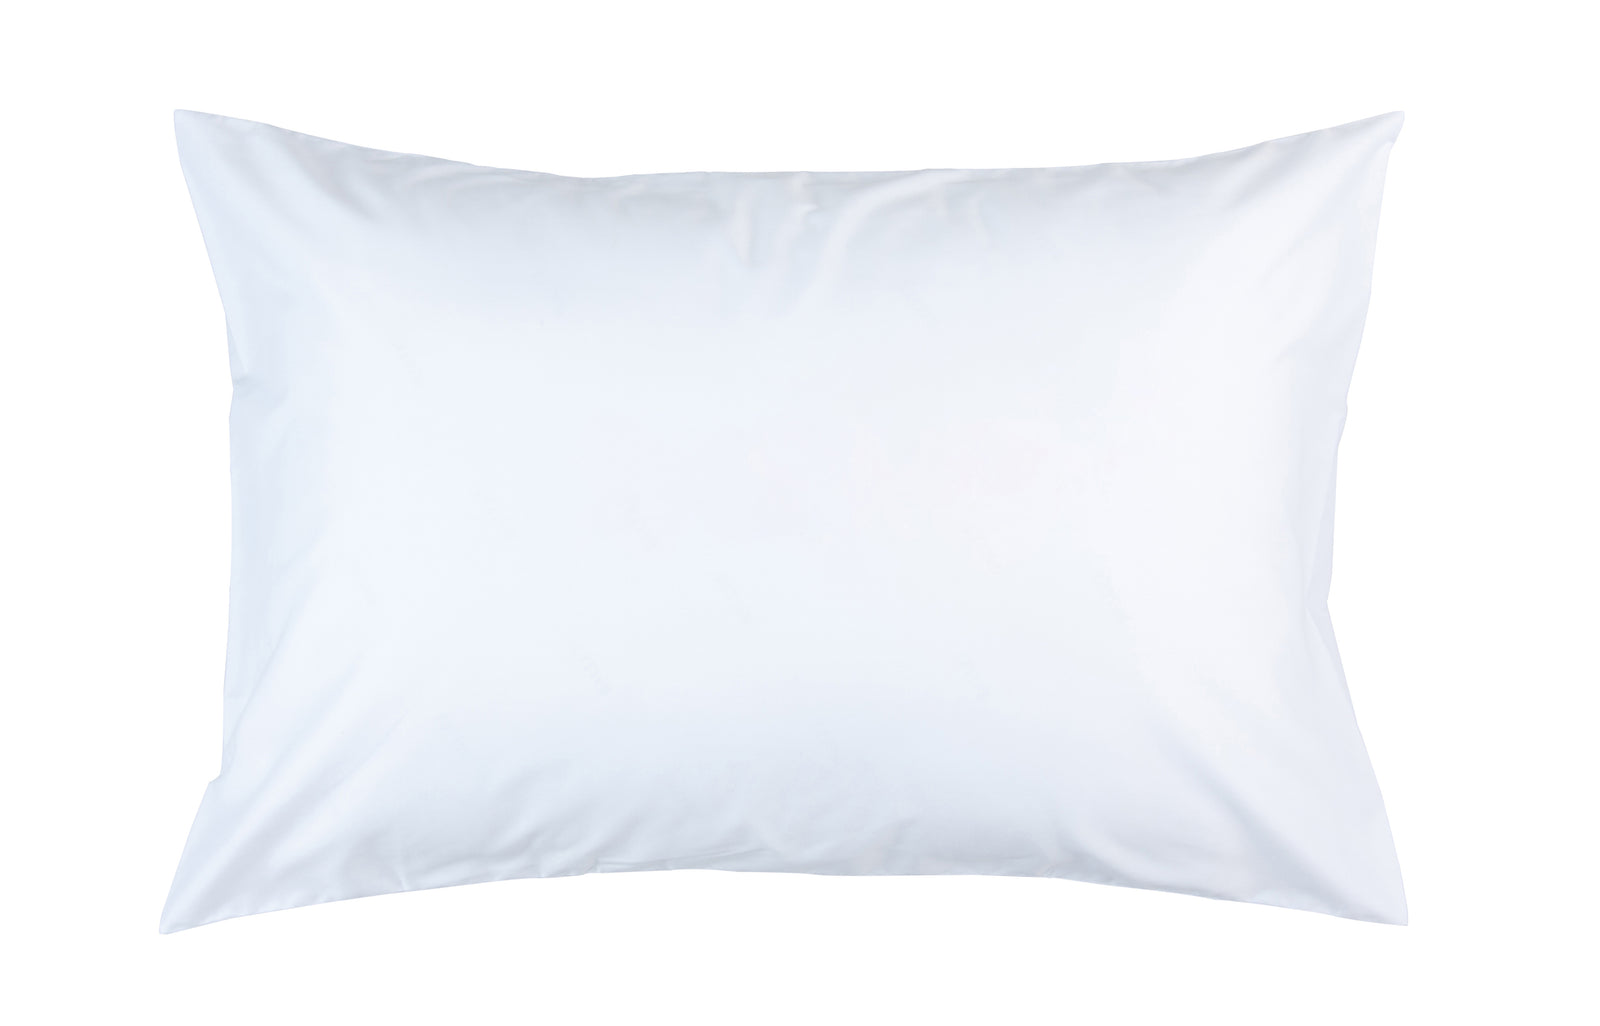 EXTRA SOFT Density Micro-Down Your Bed Pillow